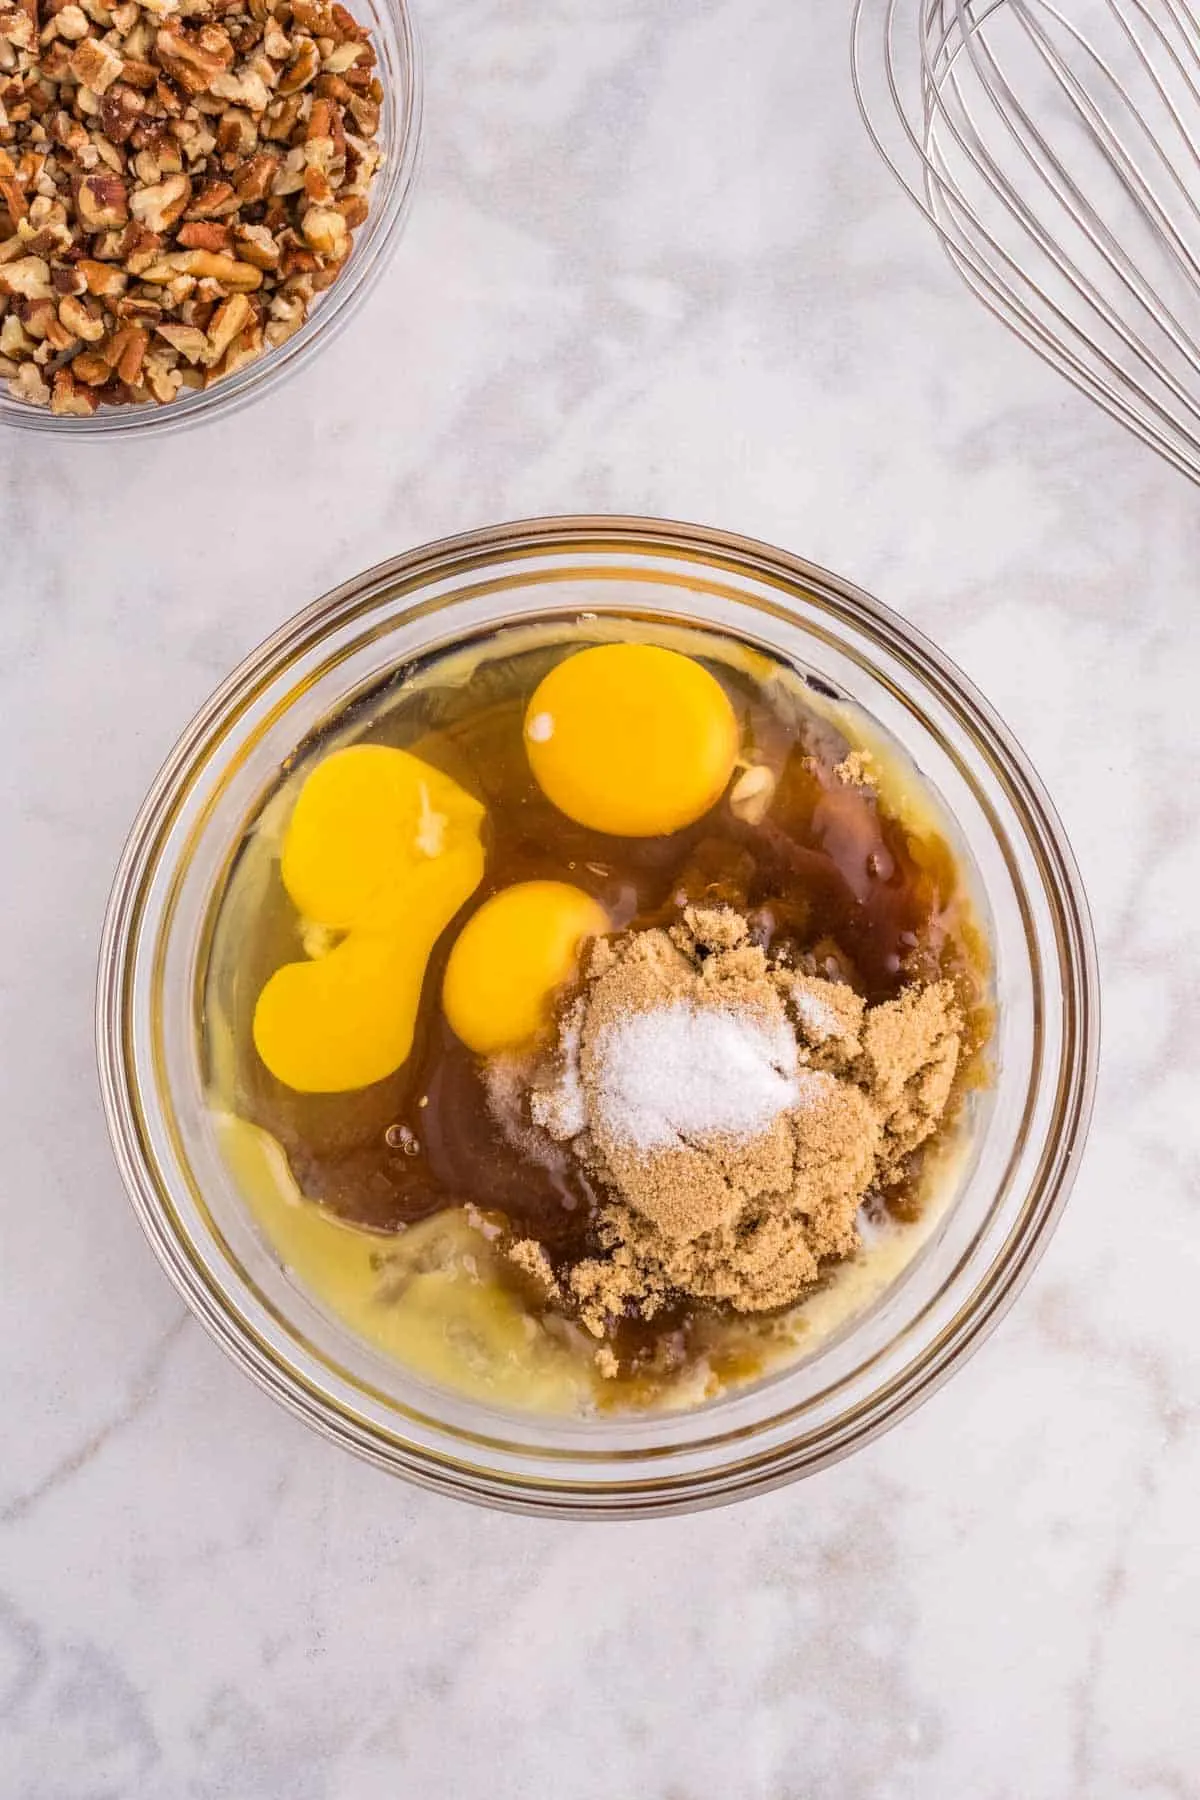 eggs, brown sugar, salt, corn syrup and maple syrup in a bowl